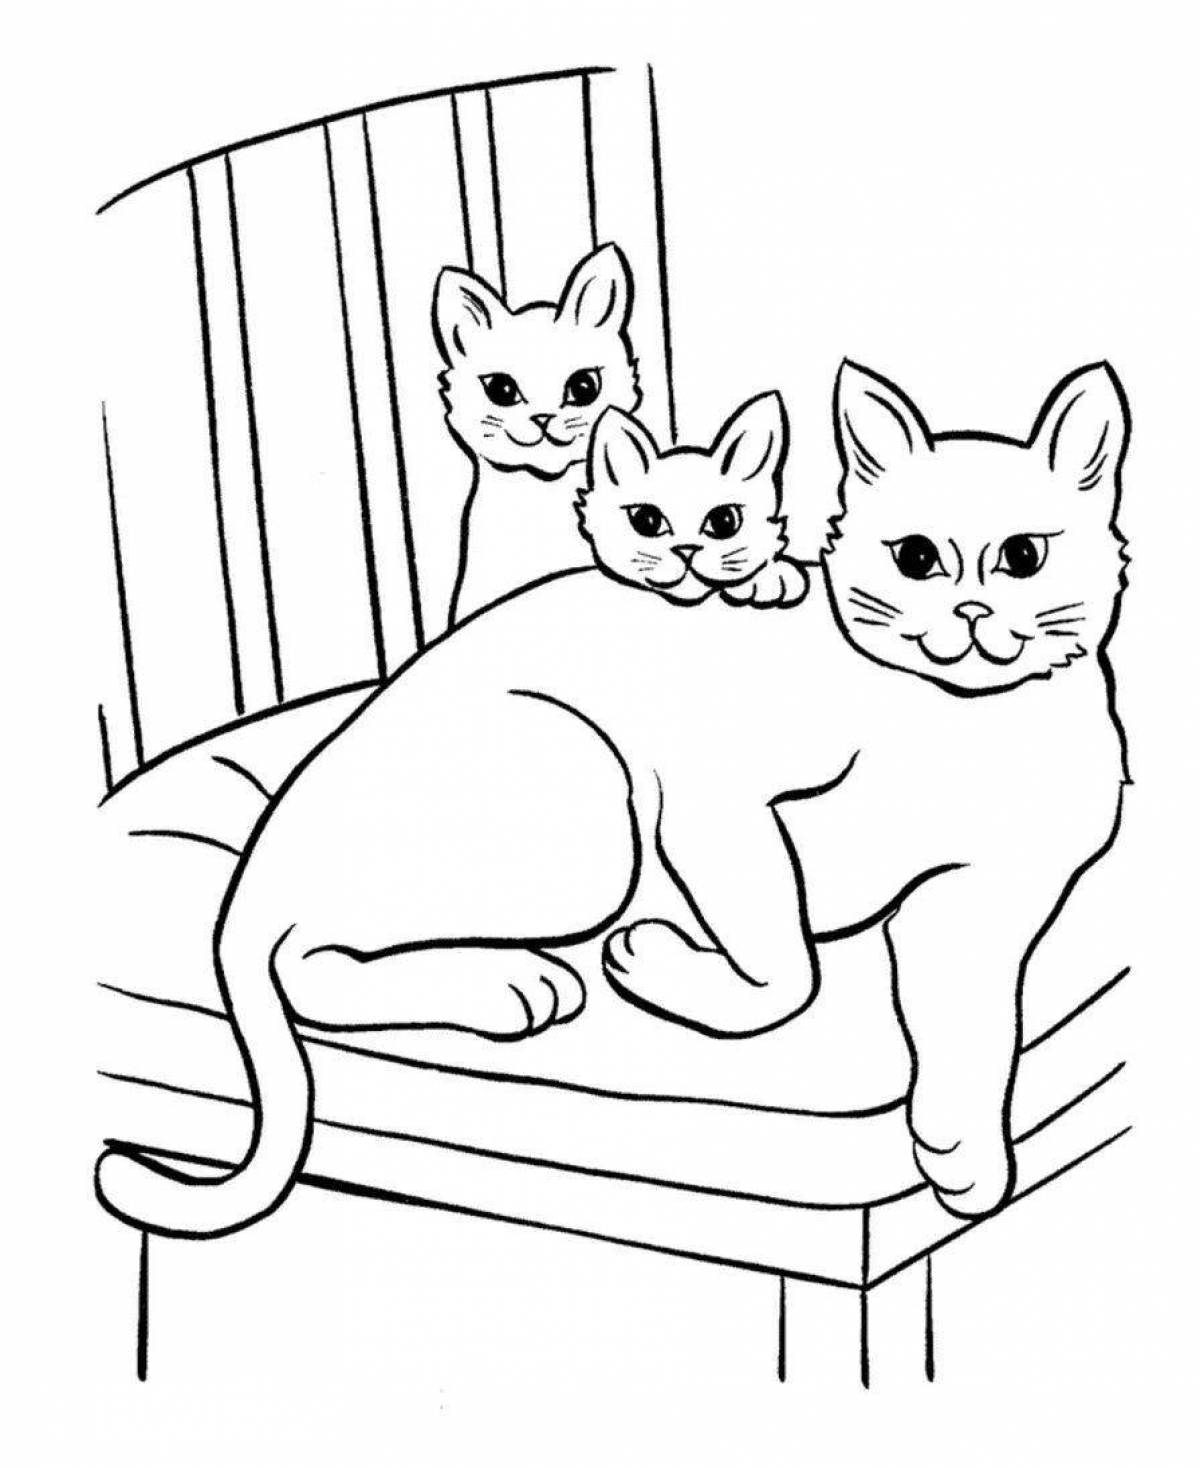 Kitty shining coloring book for kids